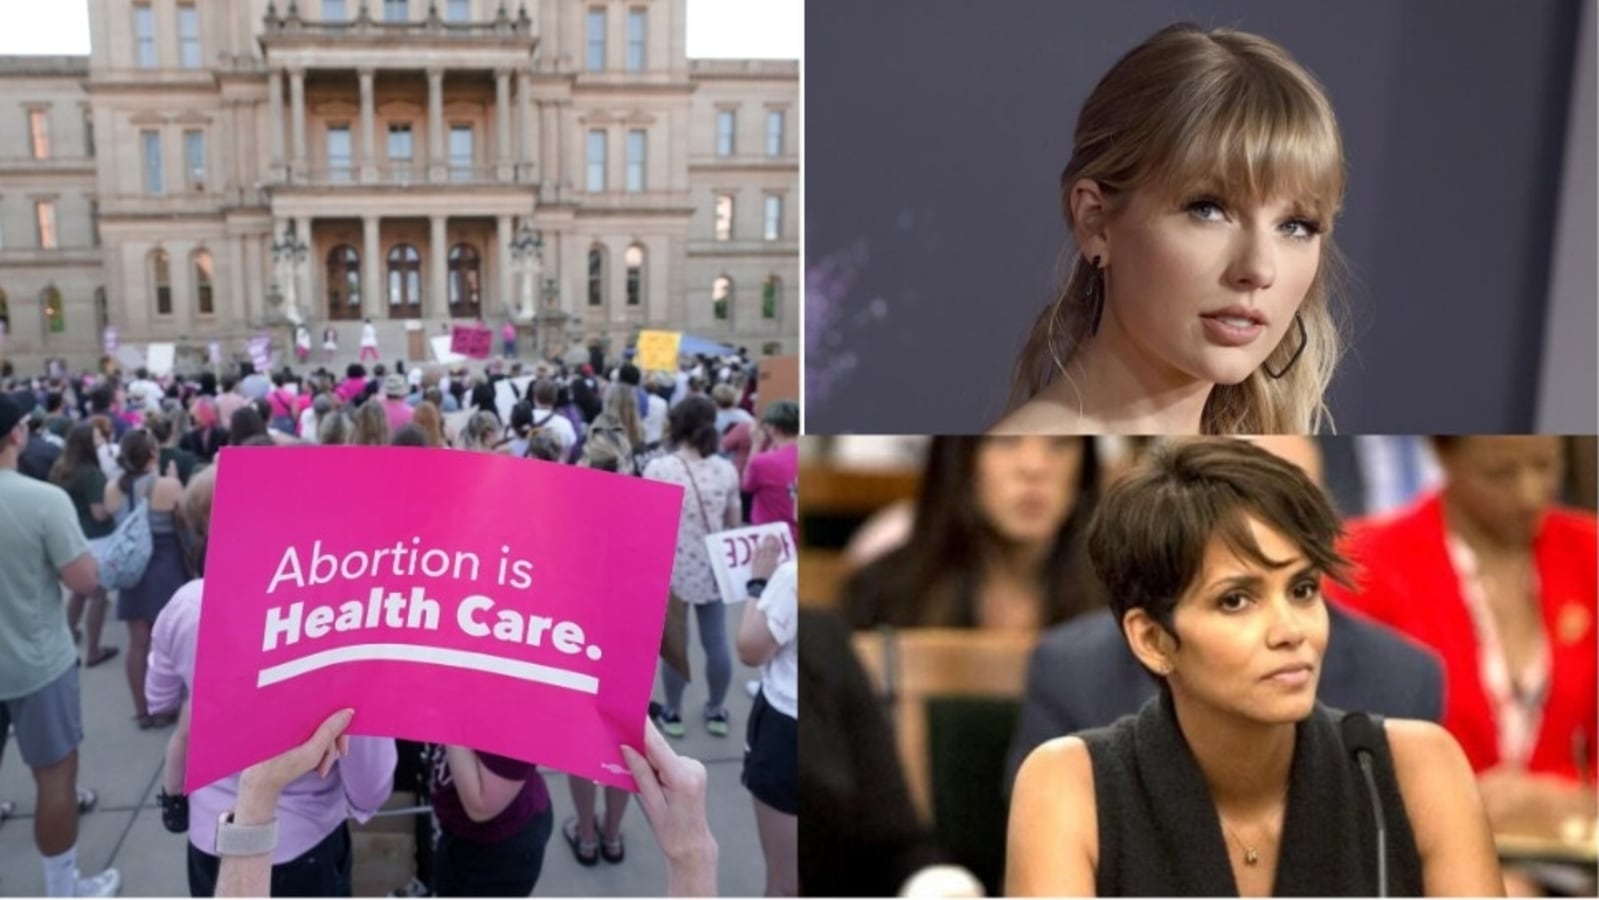 Taylor Swift is ‘terrified’ after US court ruling on abortion laws, Halle Berry says ‘guns have more rights than women’